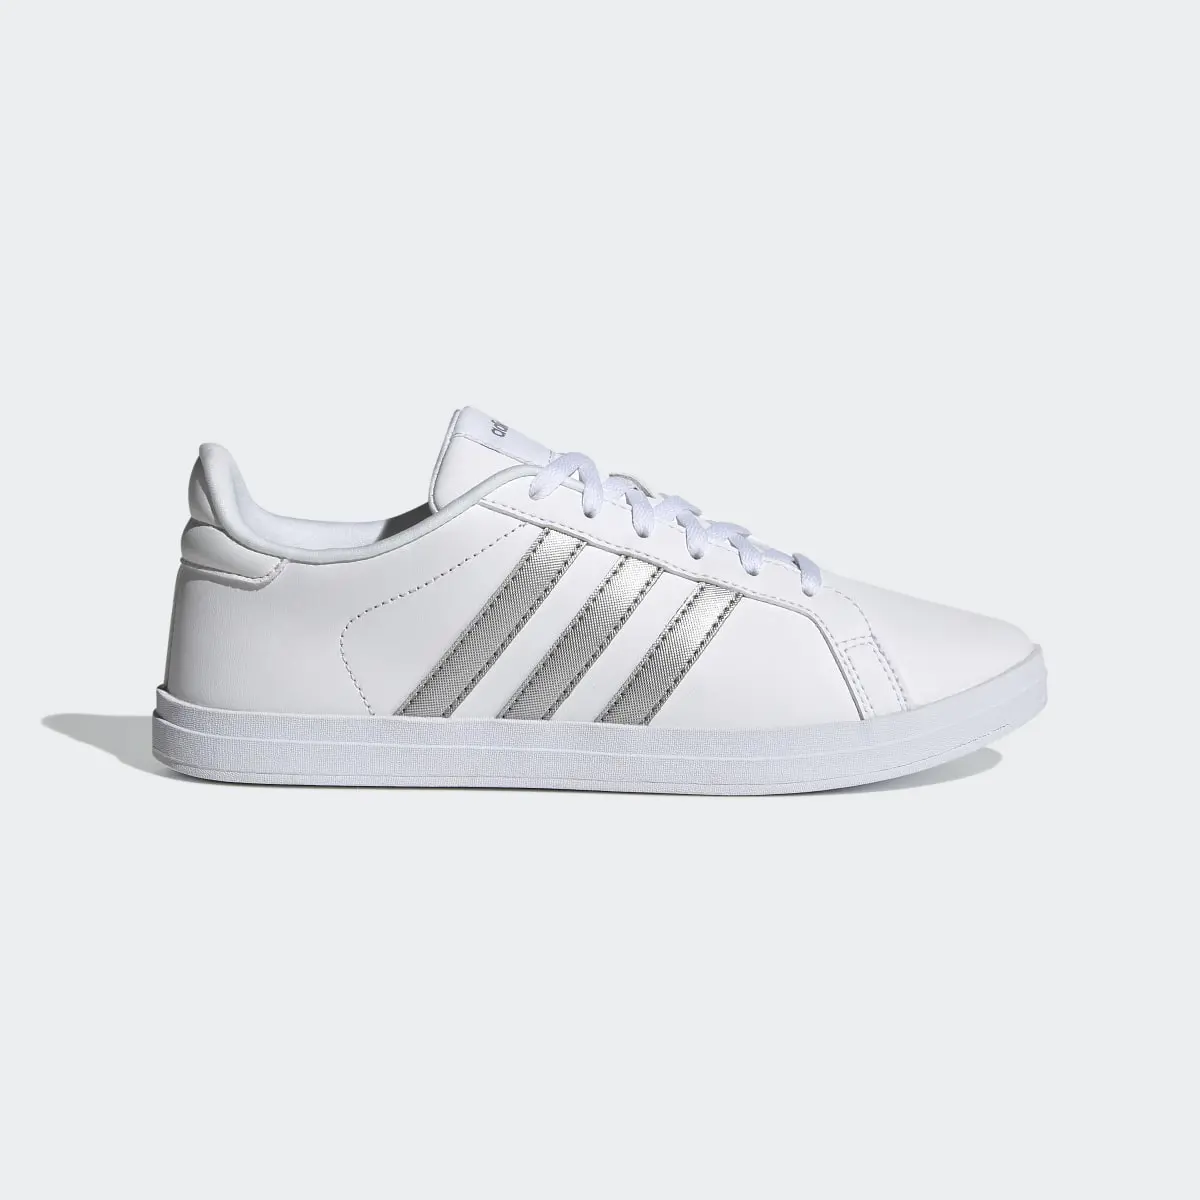 Adidas Courtpoint Shoes. 2